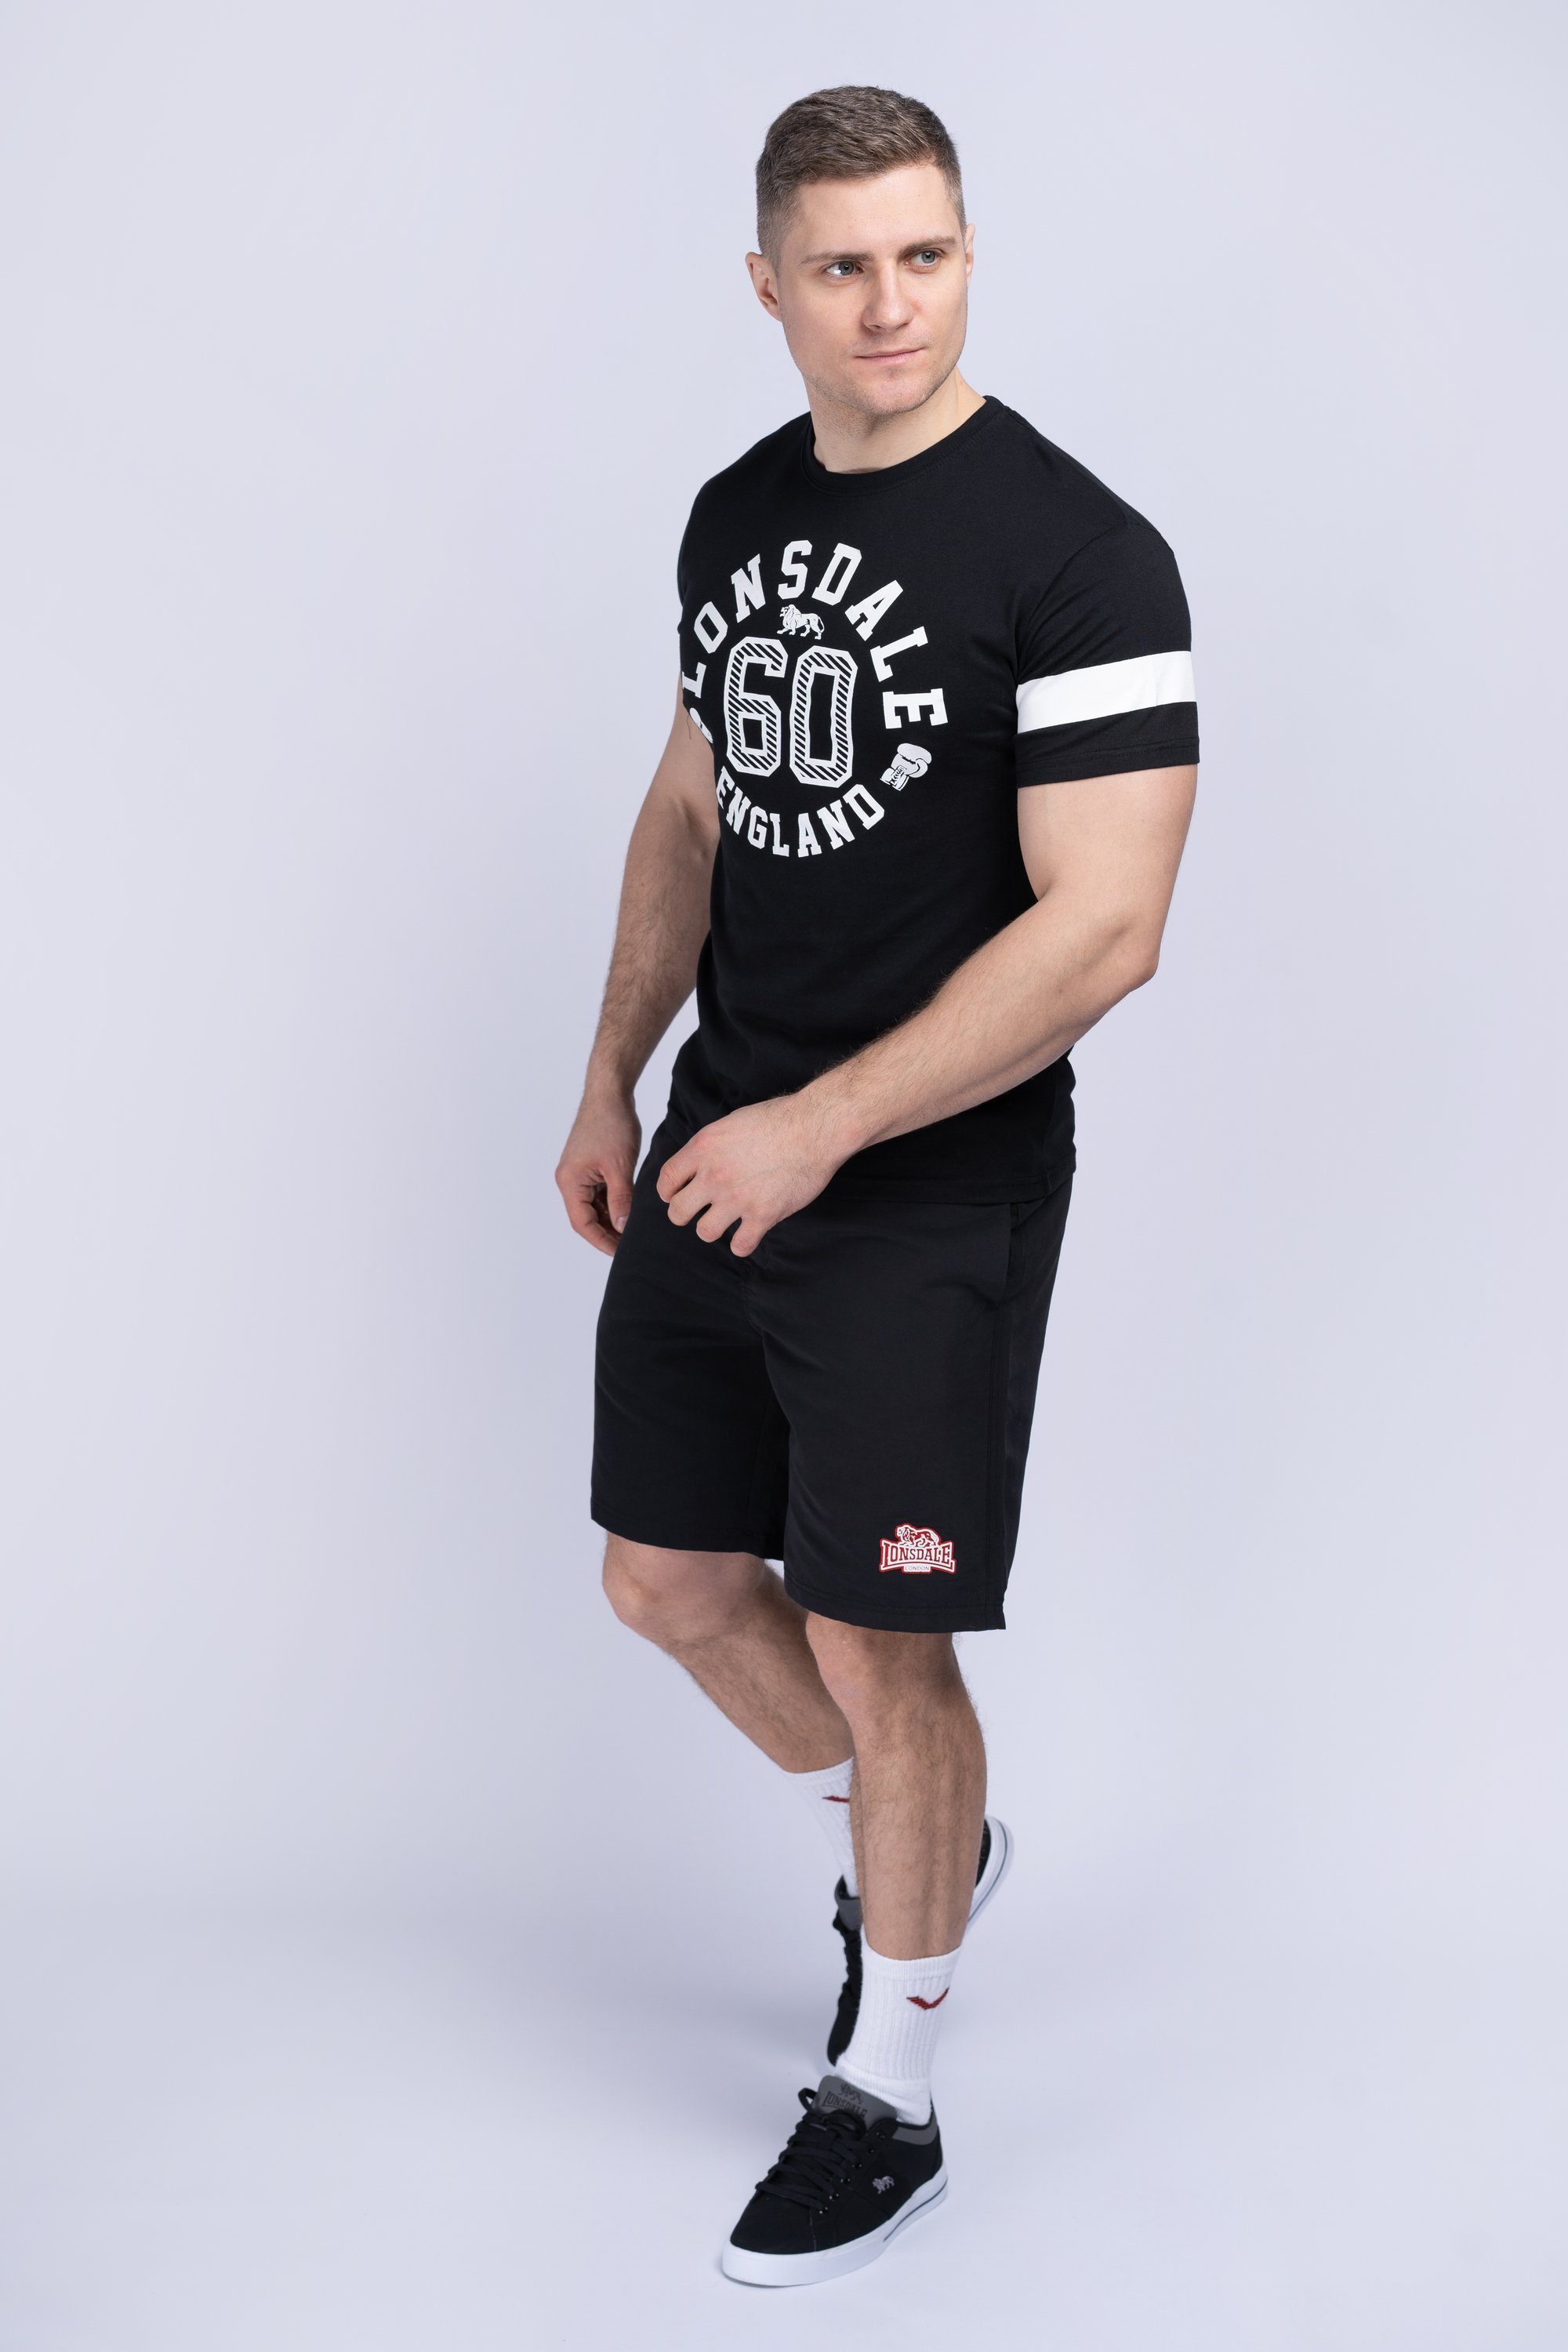 ASKERSWELL Black/White Lonsdale T-Shirt